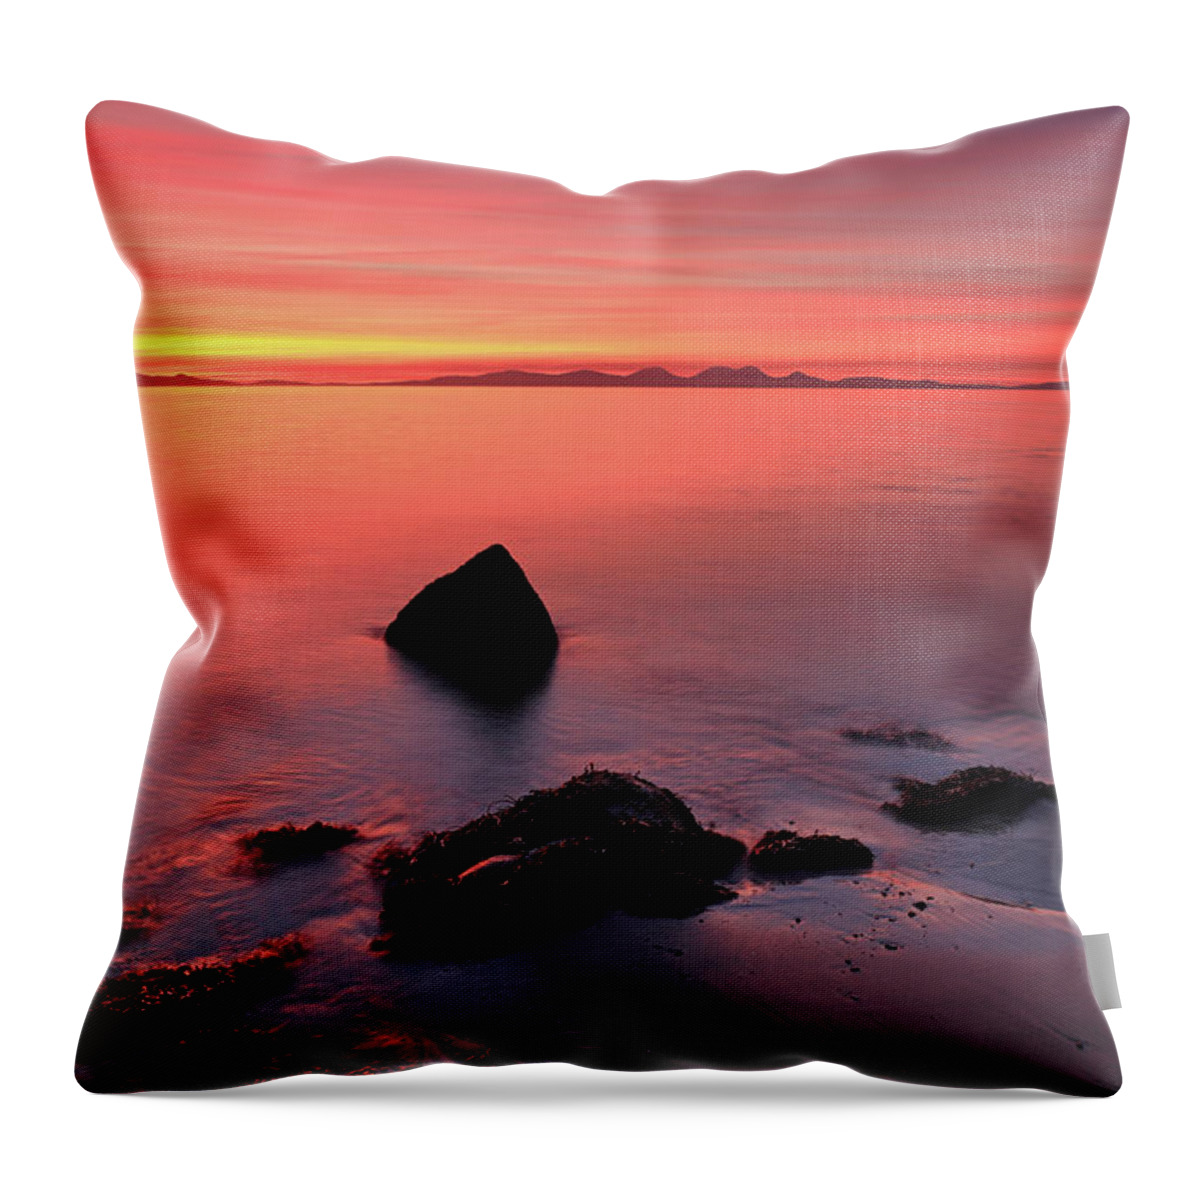 Sunset Throw Pillow featuring the photograph Kintyre Rocky Sunset 2 by Grant Glendinning